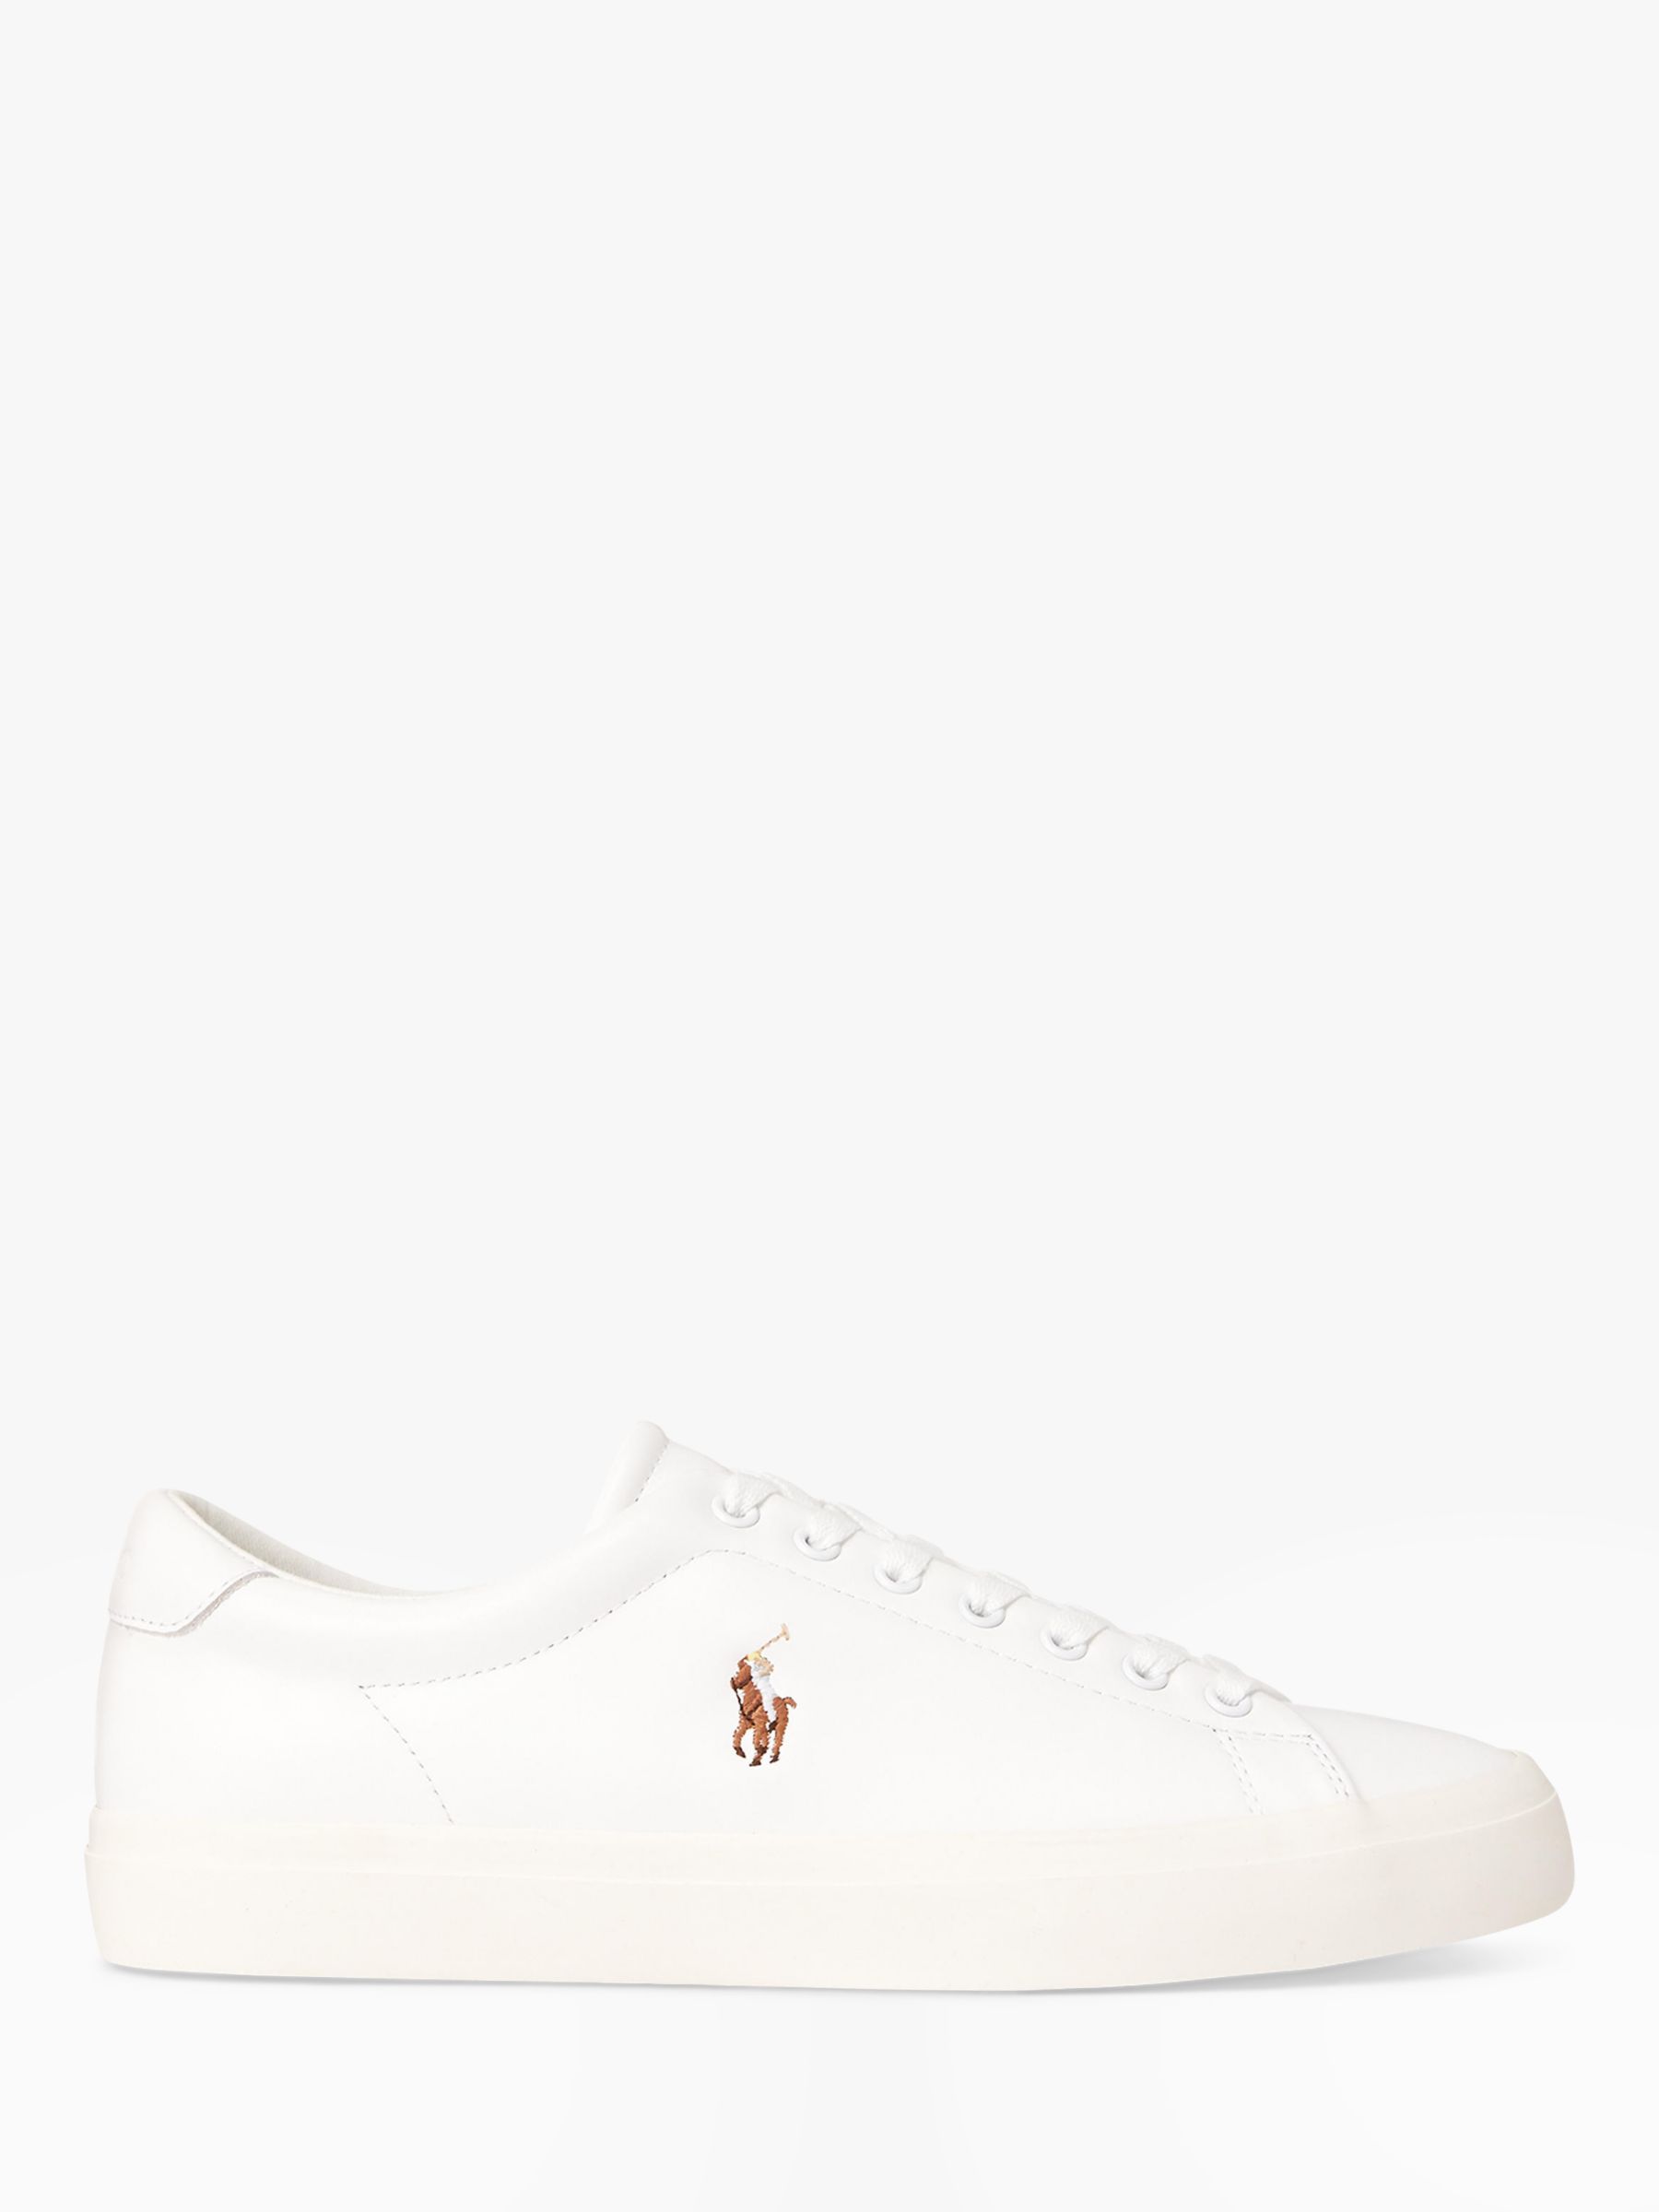 Polo Ralph Lauren Longwood Leather Trainers, White / White at John ...